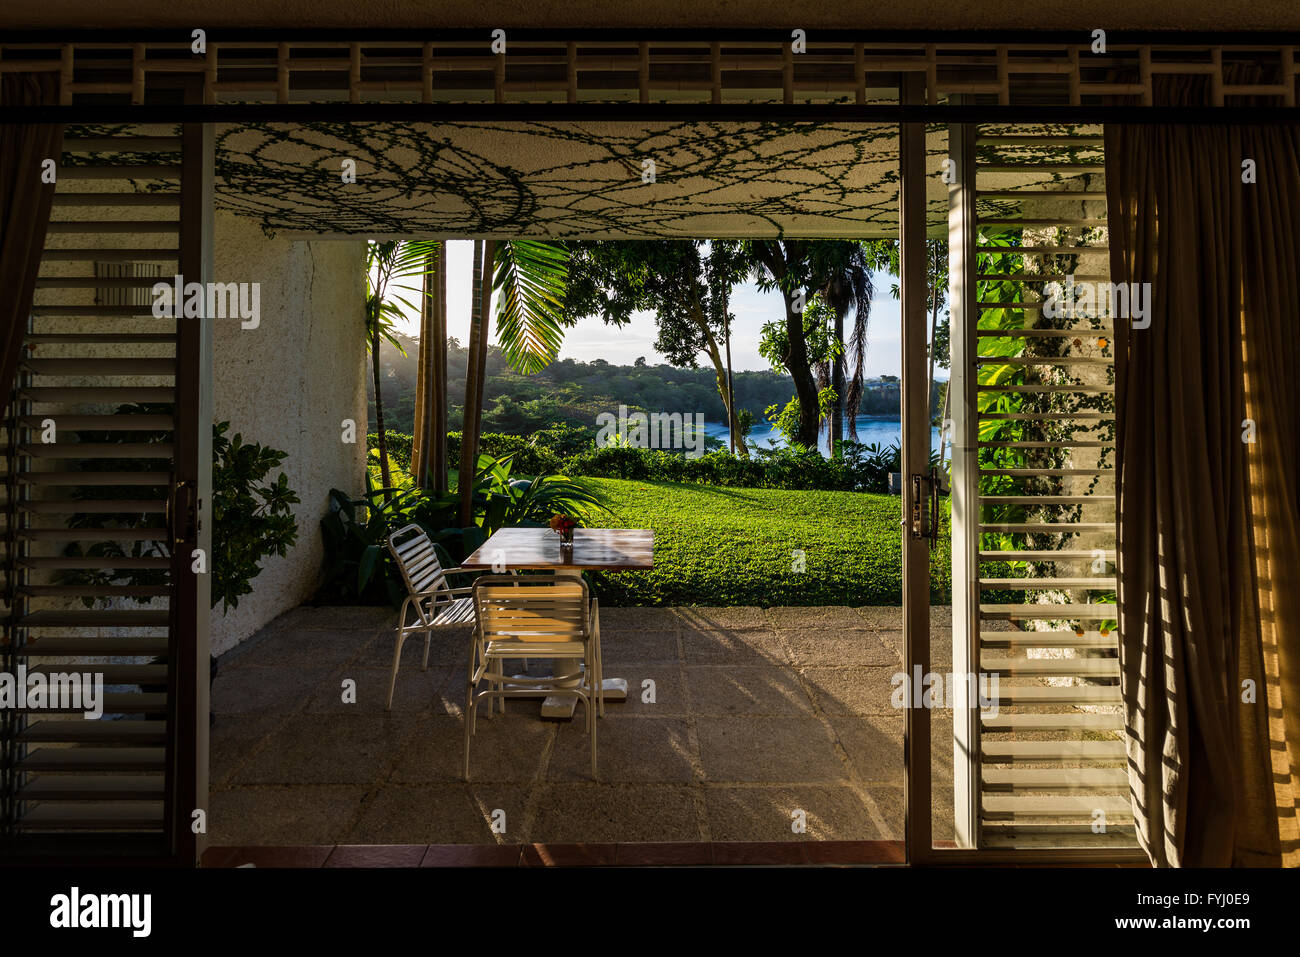 Ocean view from inside a vacation villa. Jamaica, Caribbeans. Stock Photo